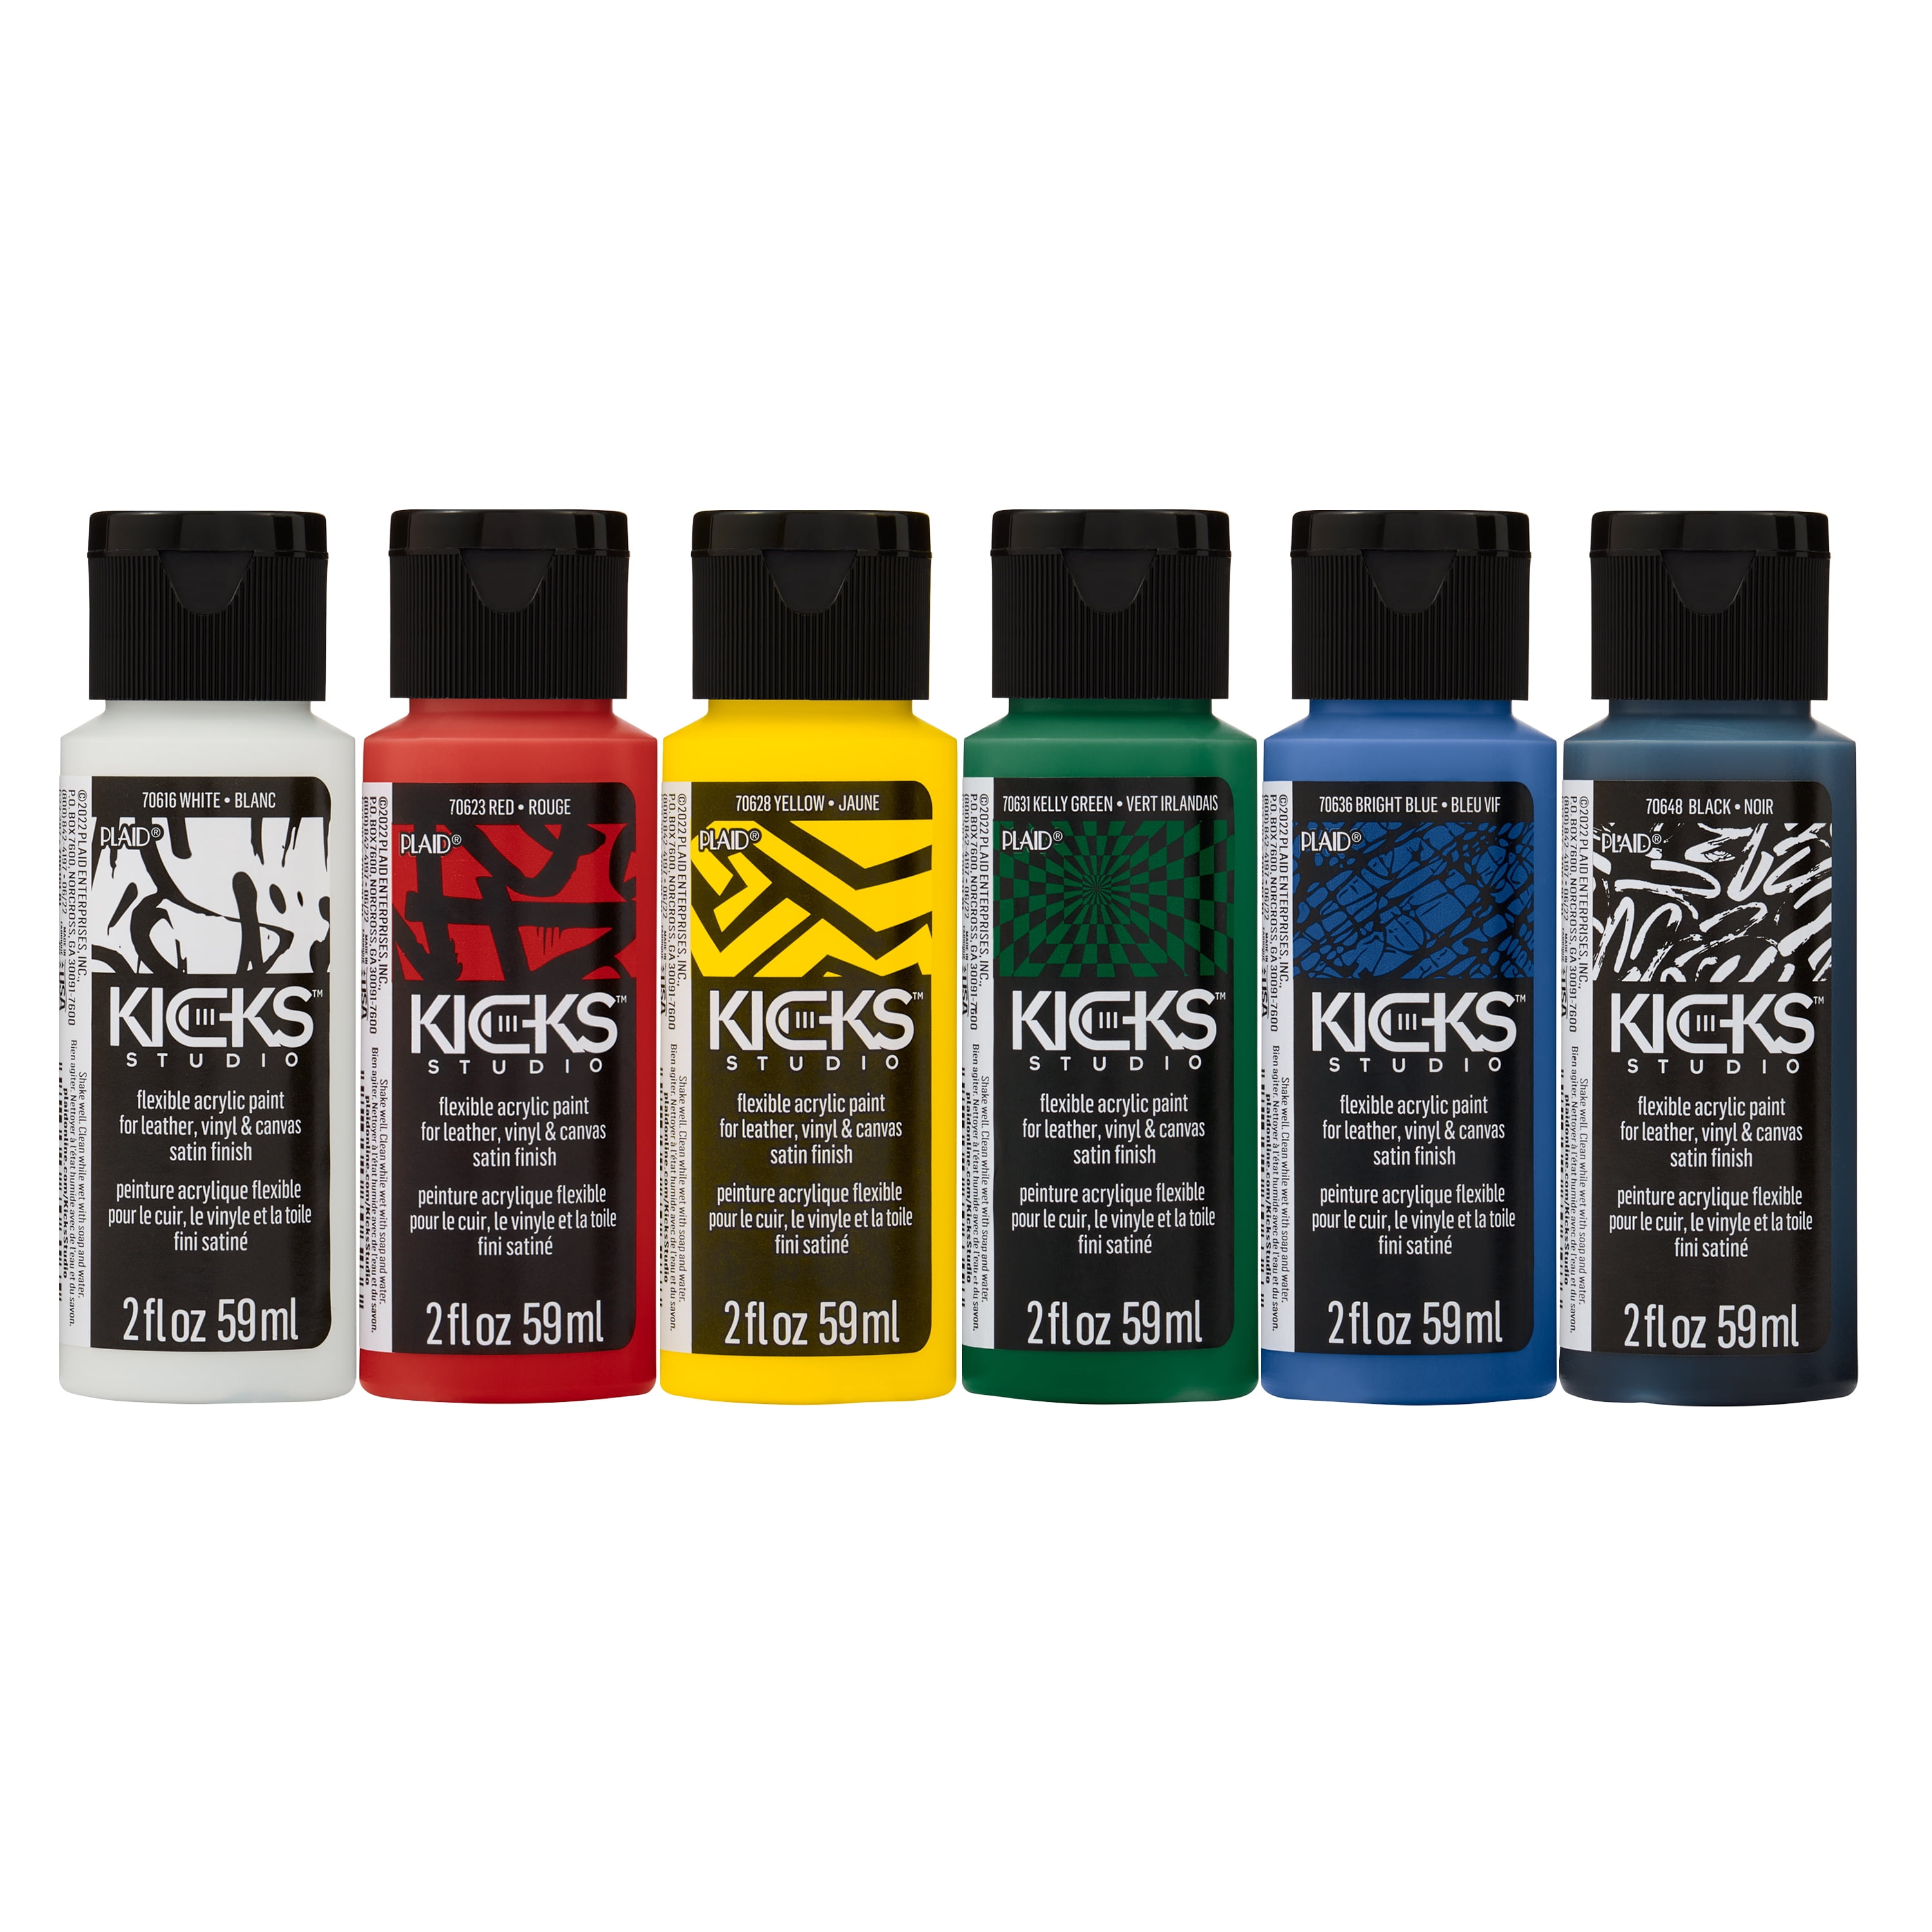 2 x Angelus Acrylic Leather Paint Water Resistant 1 Oz - Available 26  Colors